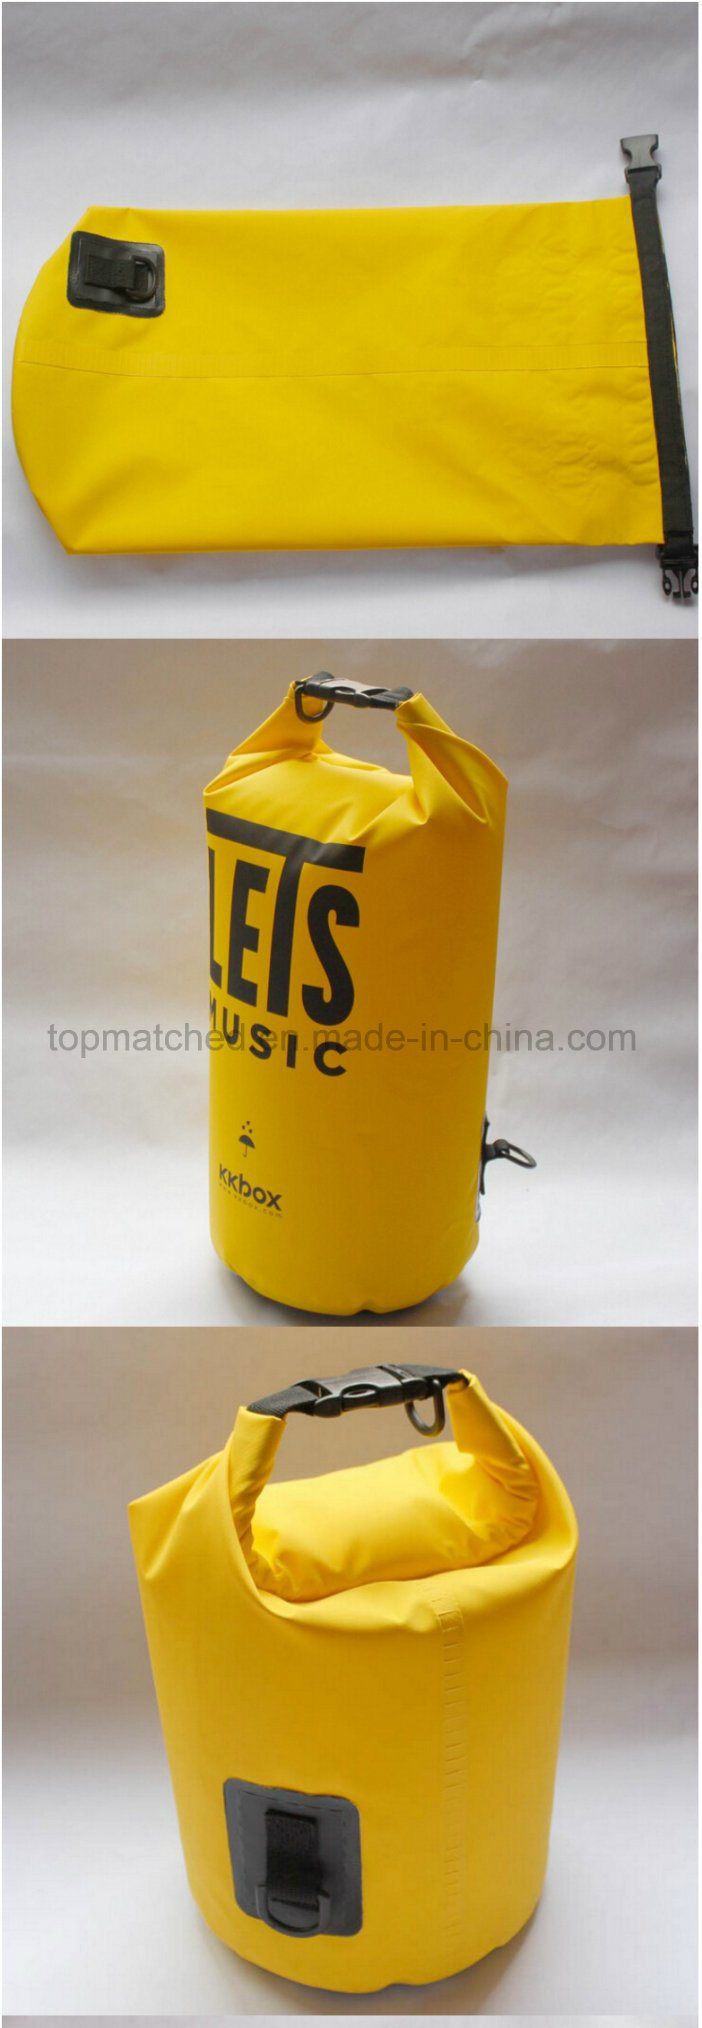 Ultralight Outdoor Travel Waterproof Dry Bag Portable Hiking River Rafting Swimming Small 2L Dry Bags